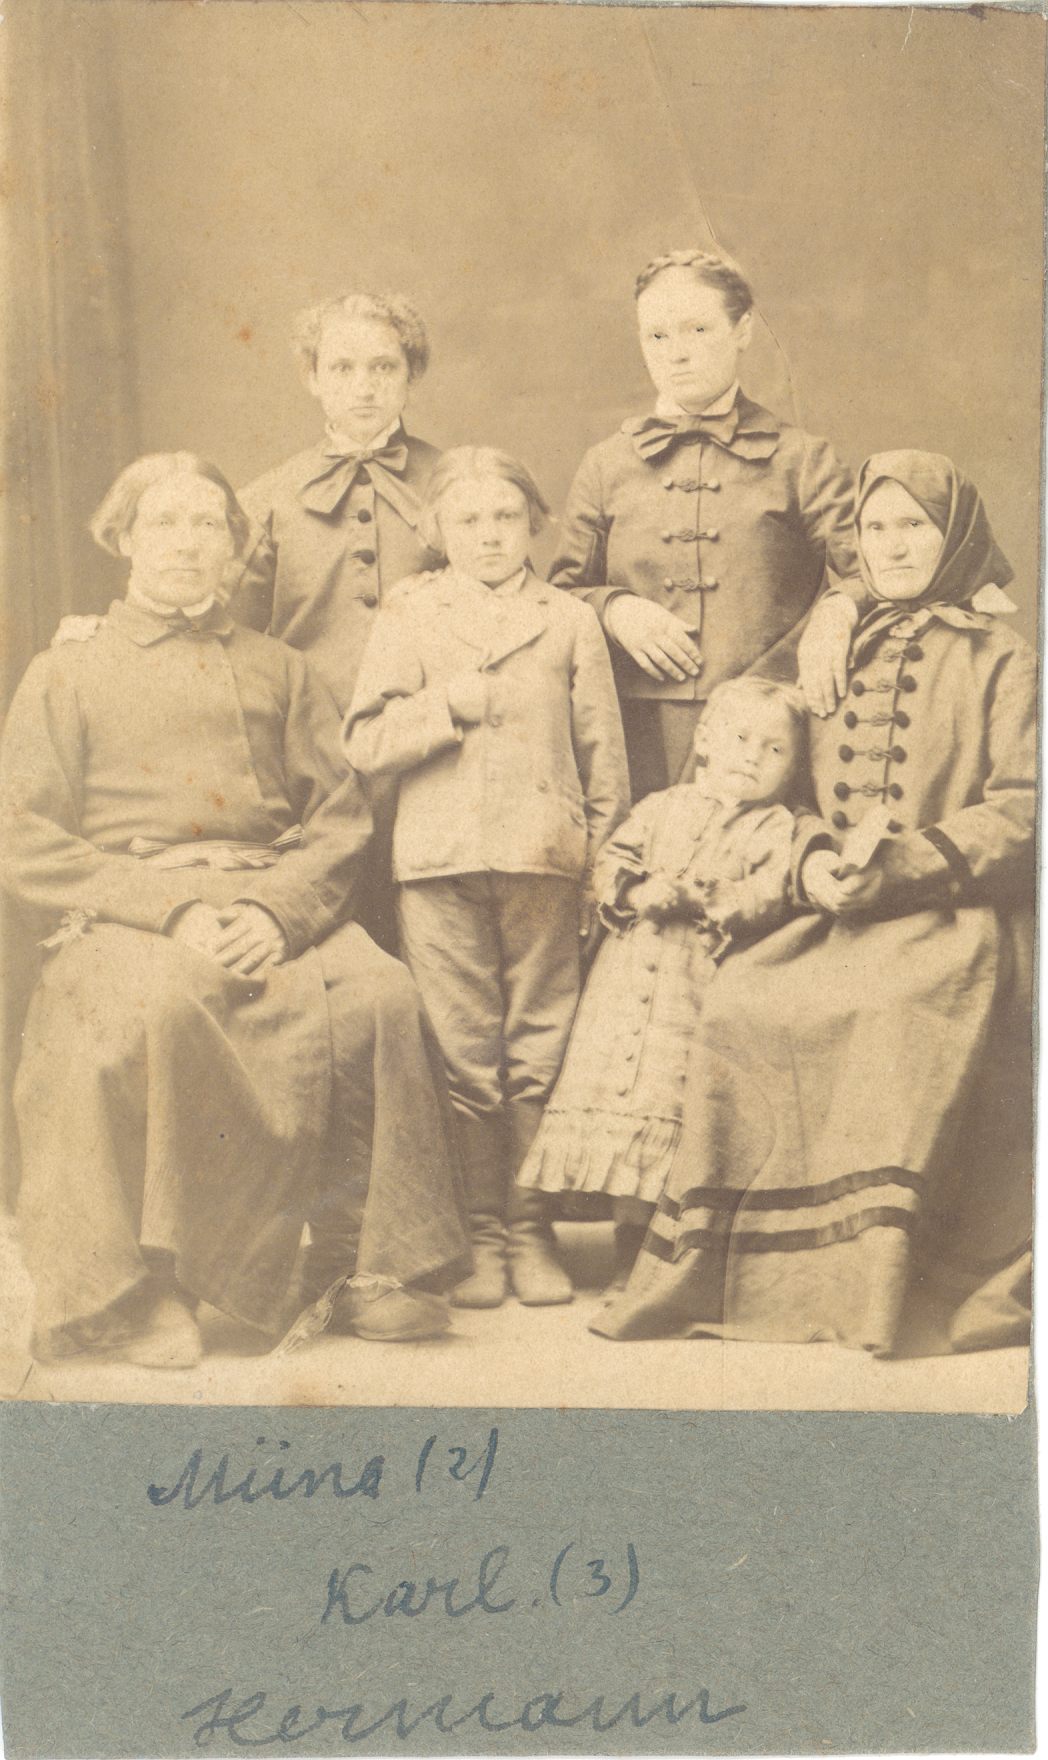 Härma, Miina on the left another \x96 with her parents, sisters and brother